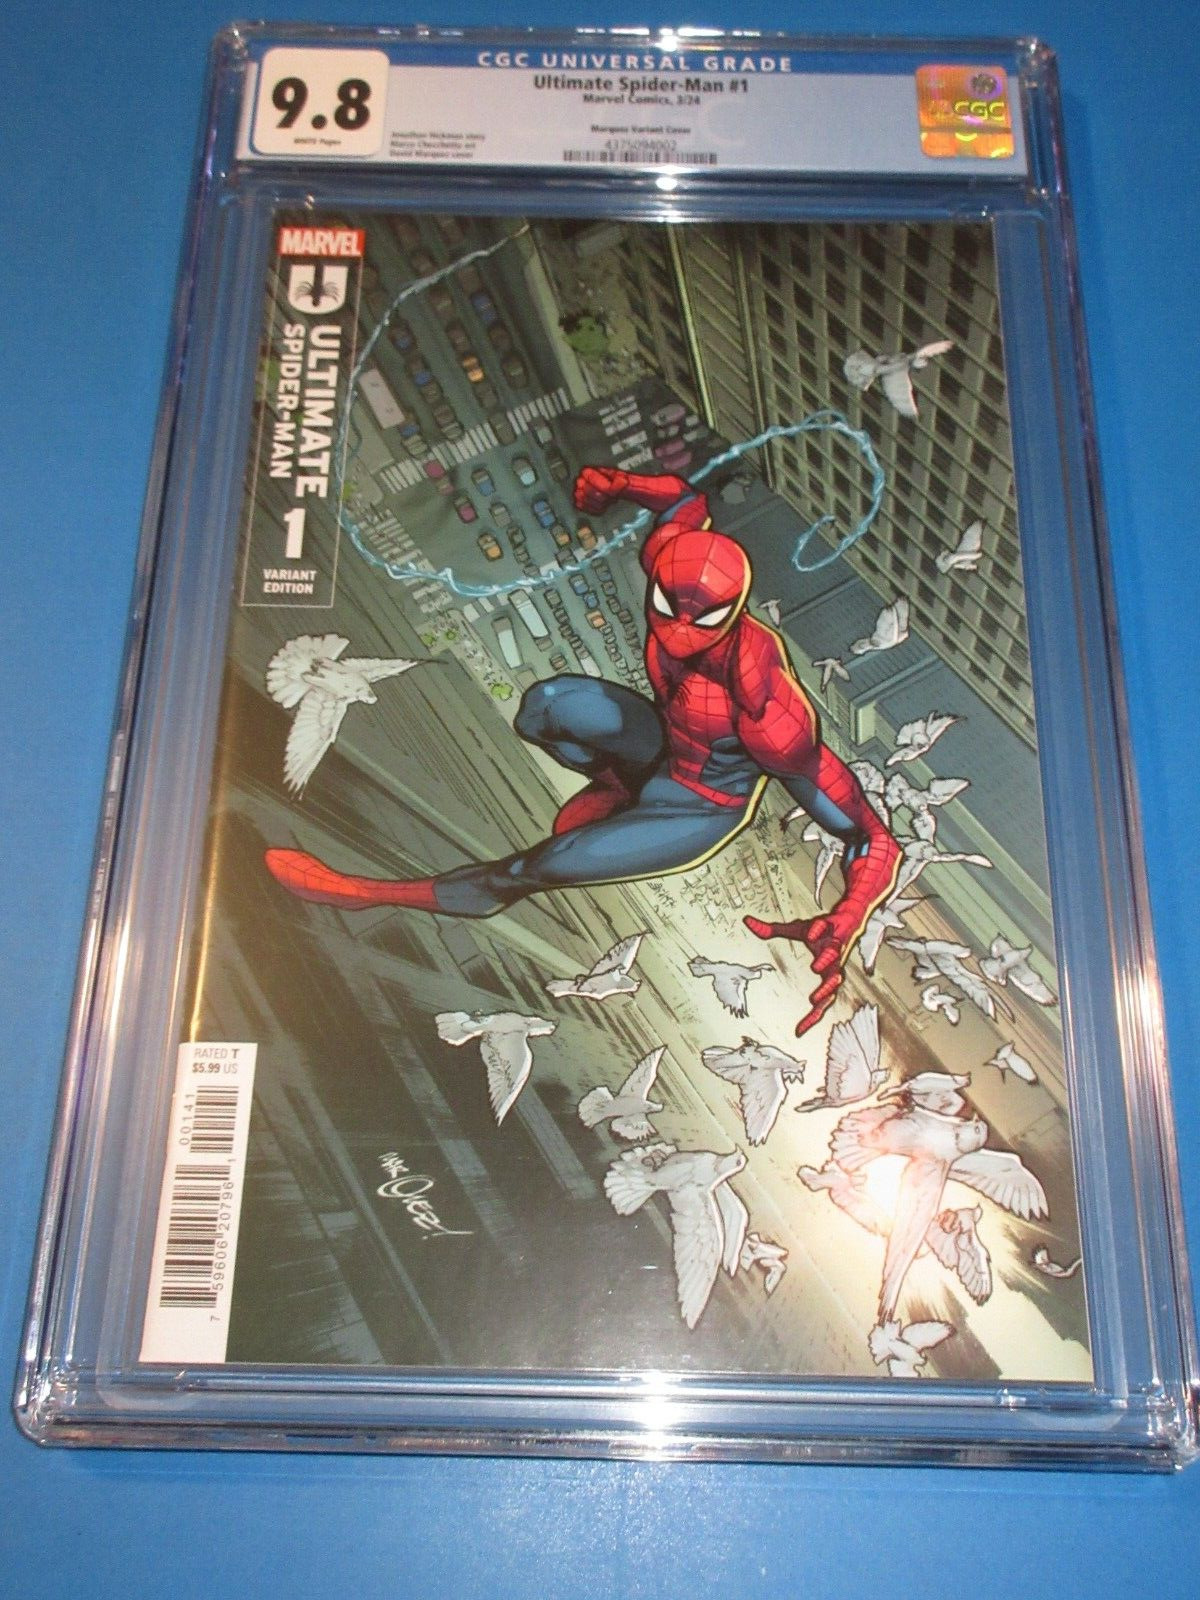 Ultimate Spider-man #1 Marquez Variant Hot Key CGC 9.8 NM/M Gem Wow IN HAND